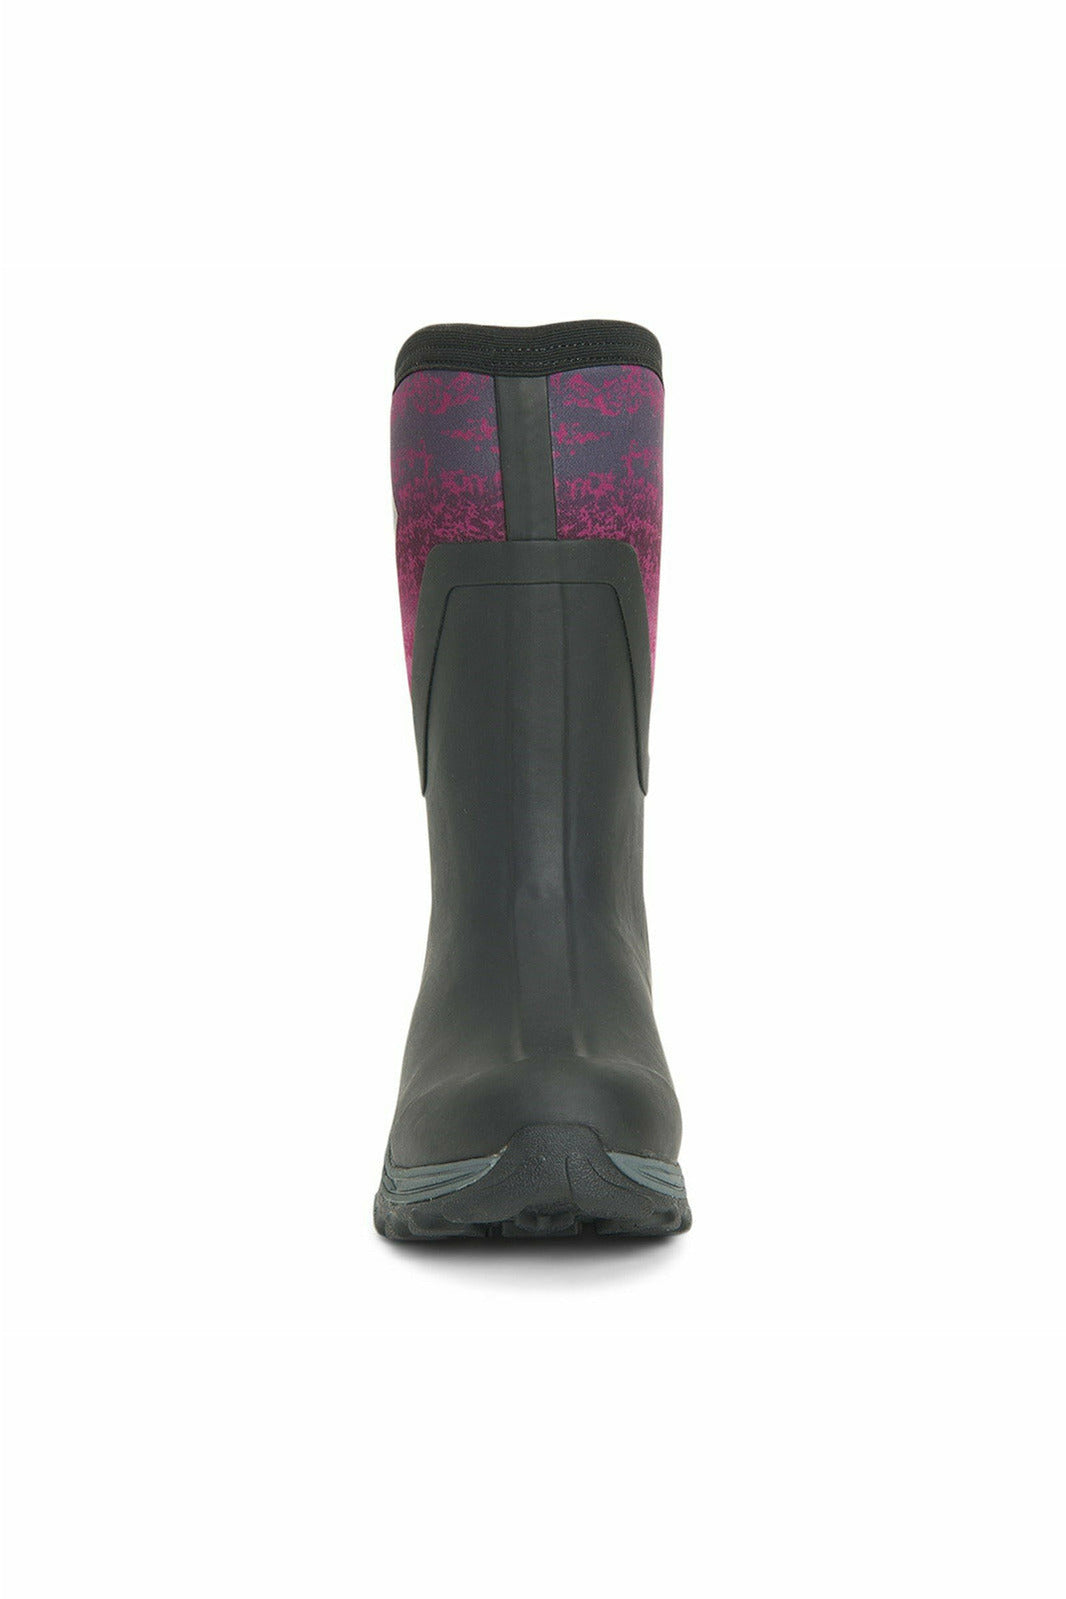 Muck Boots - Arctic Sport Mid Pull On Wellington Boot